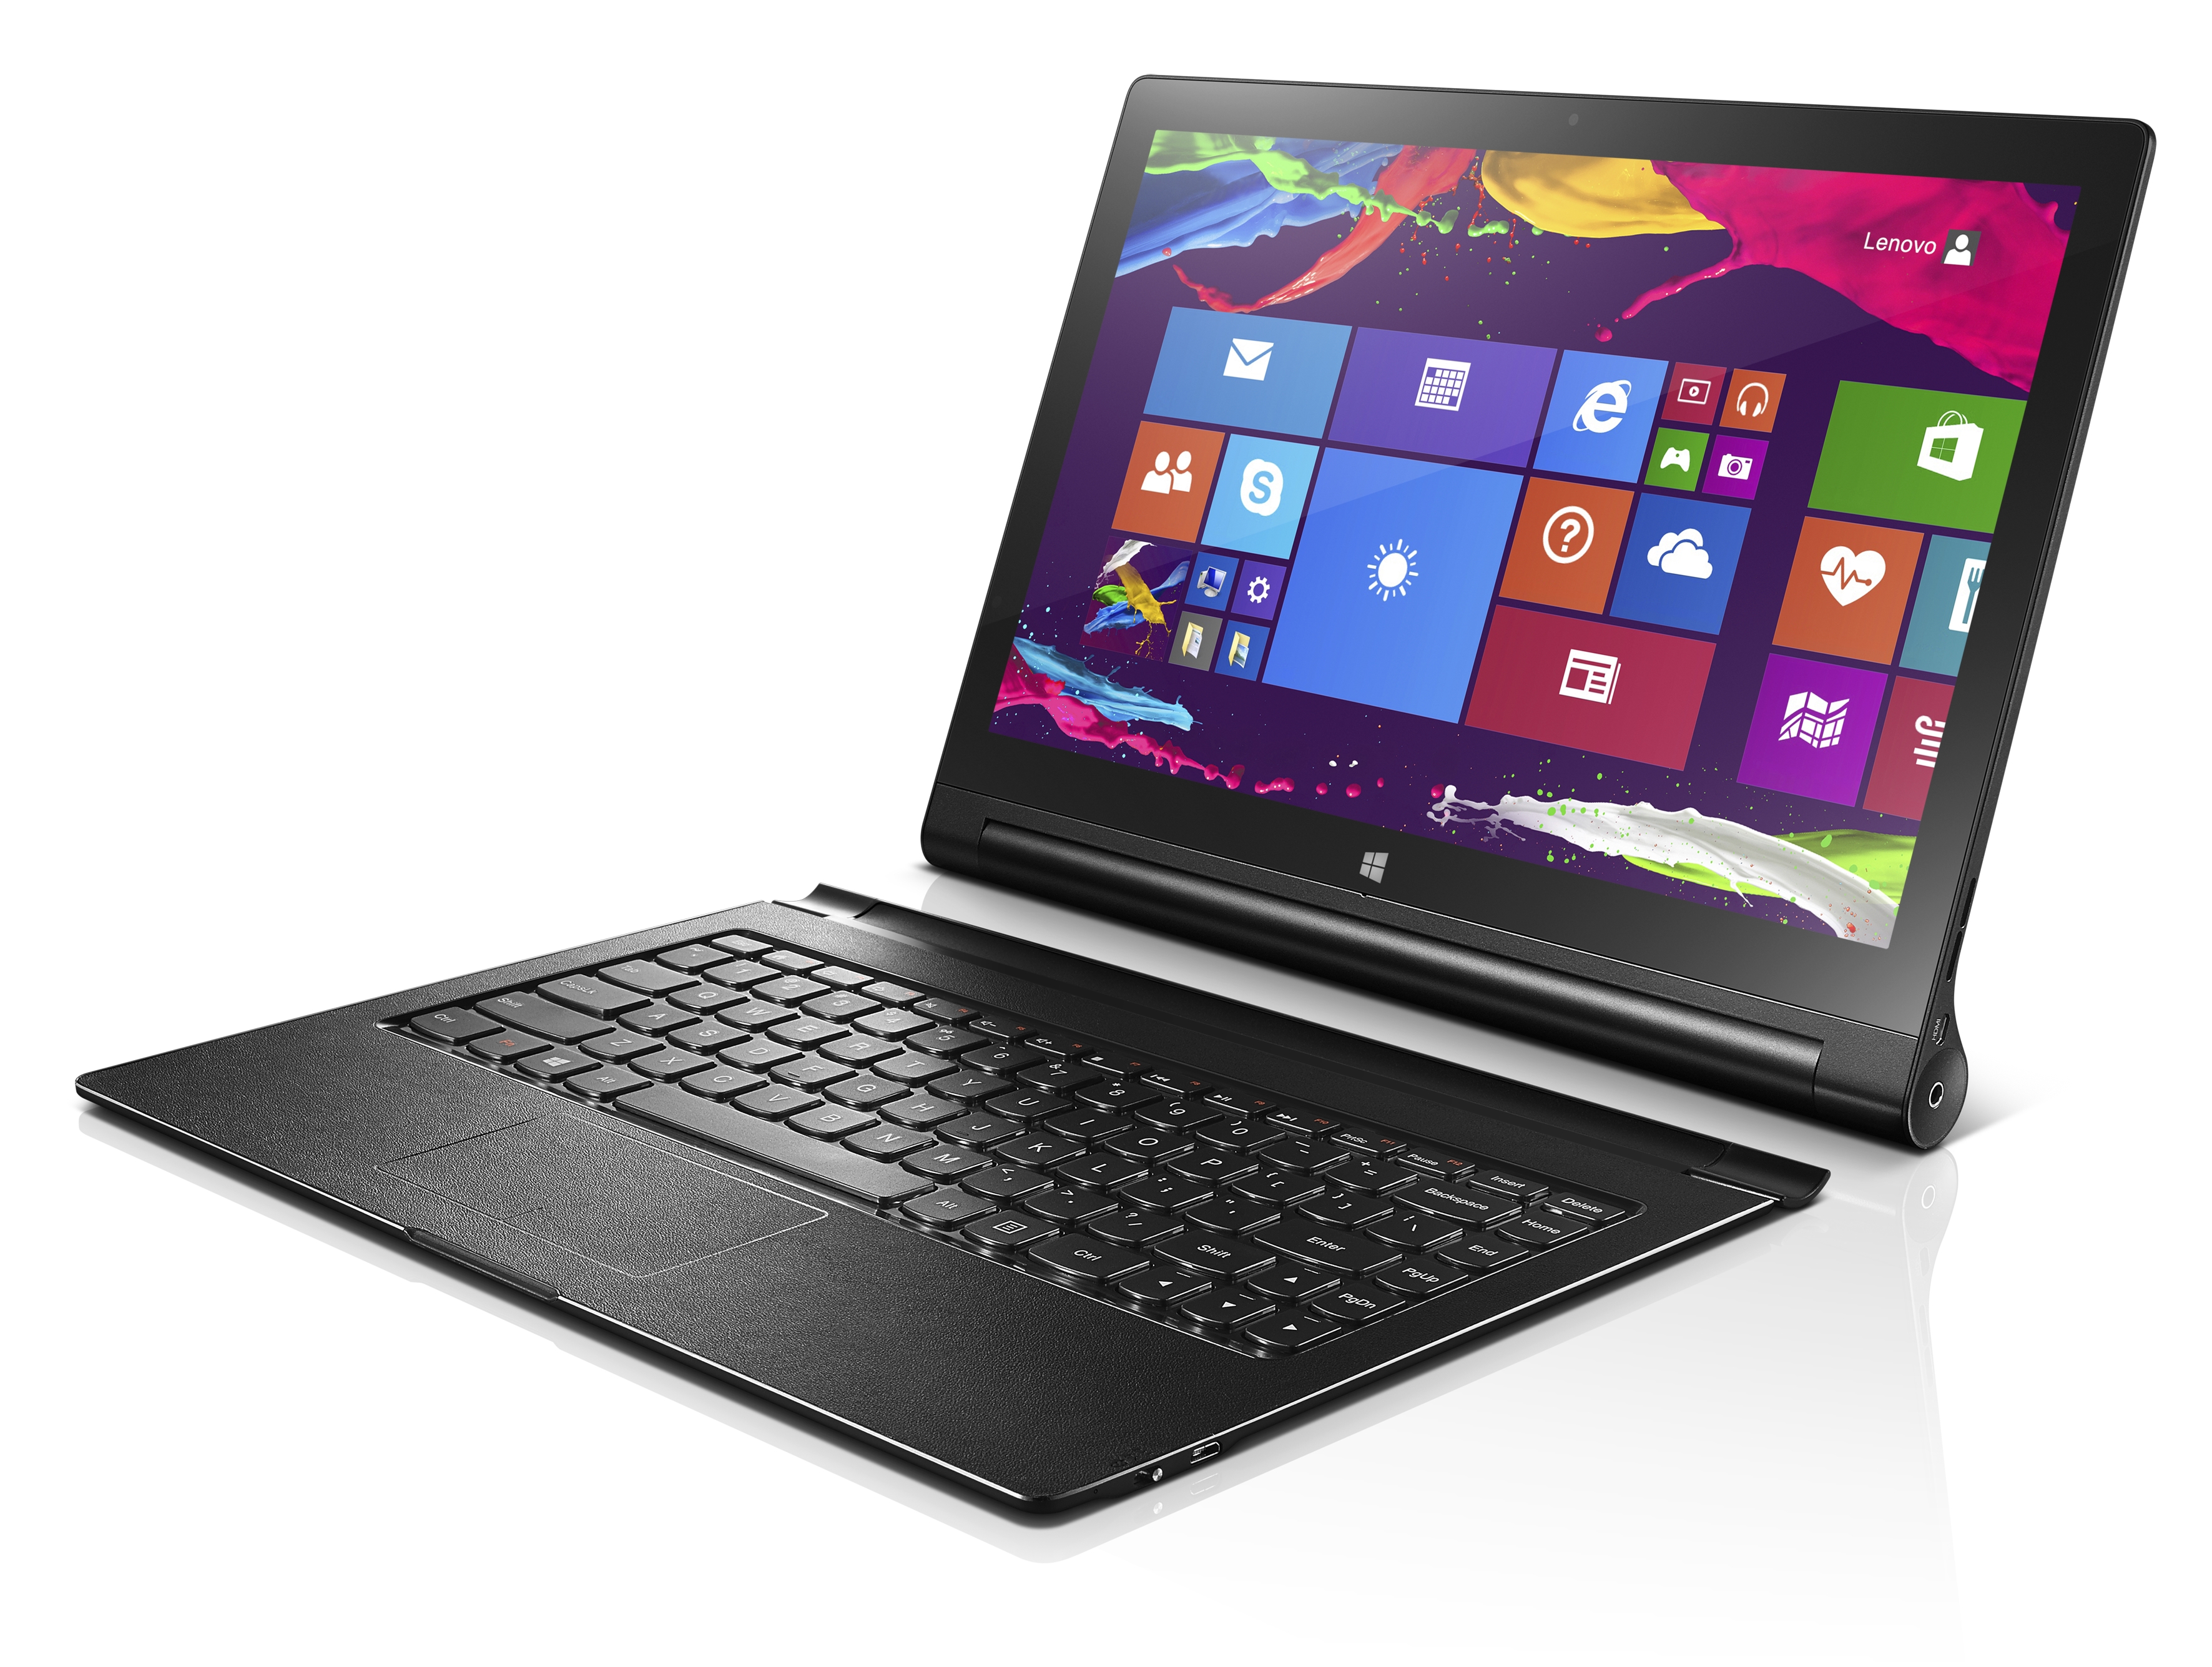 Lenovo adds a 13-inch Windows tablet to the Yoga mix | Ars ...
